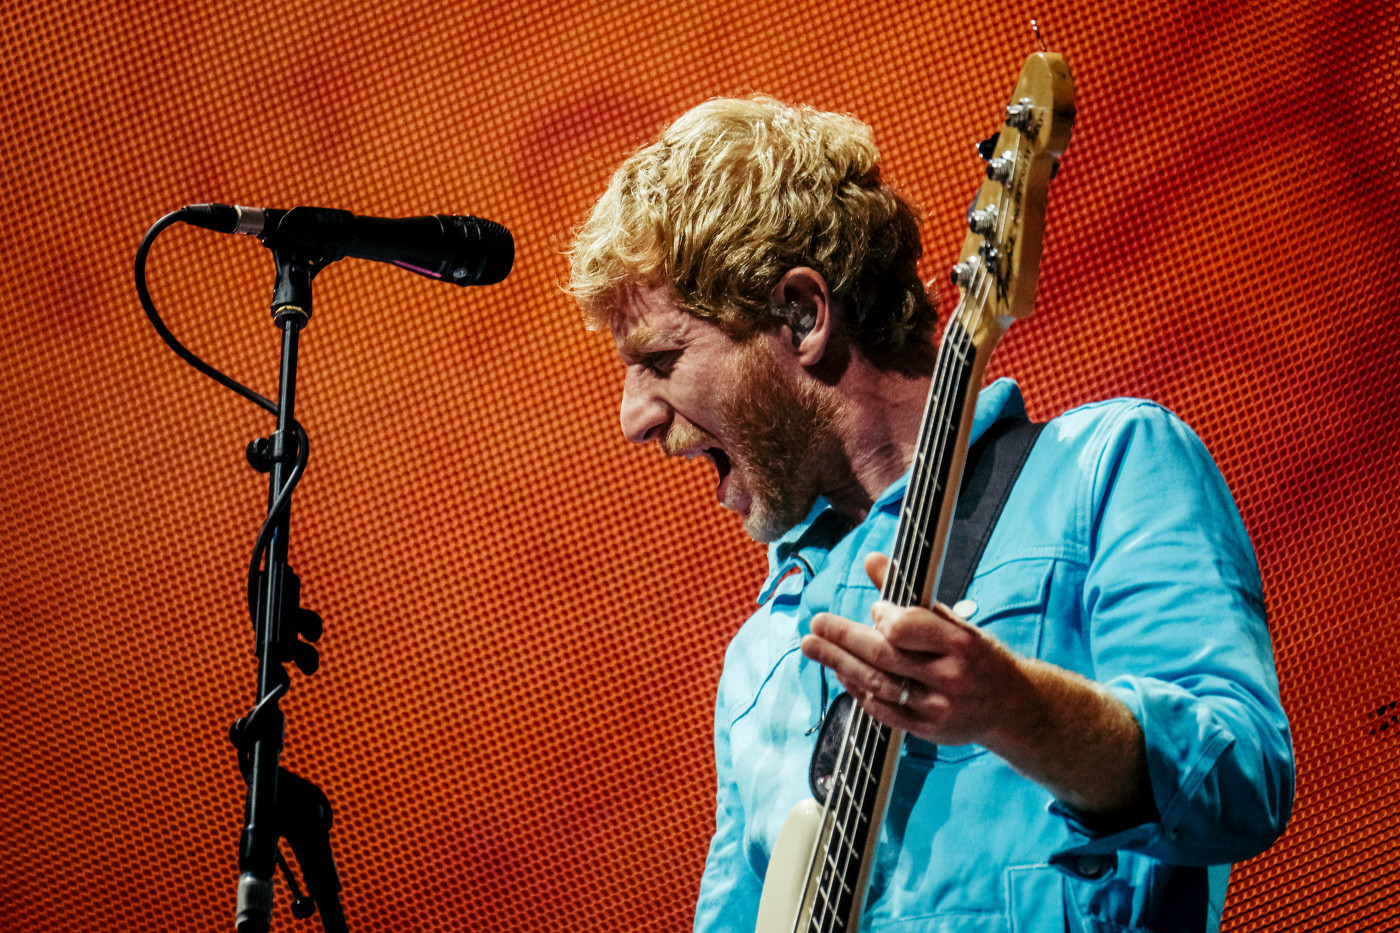 Biffy Clyro perform at Glasgow Green on 9th September 2021